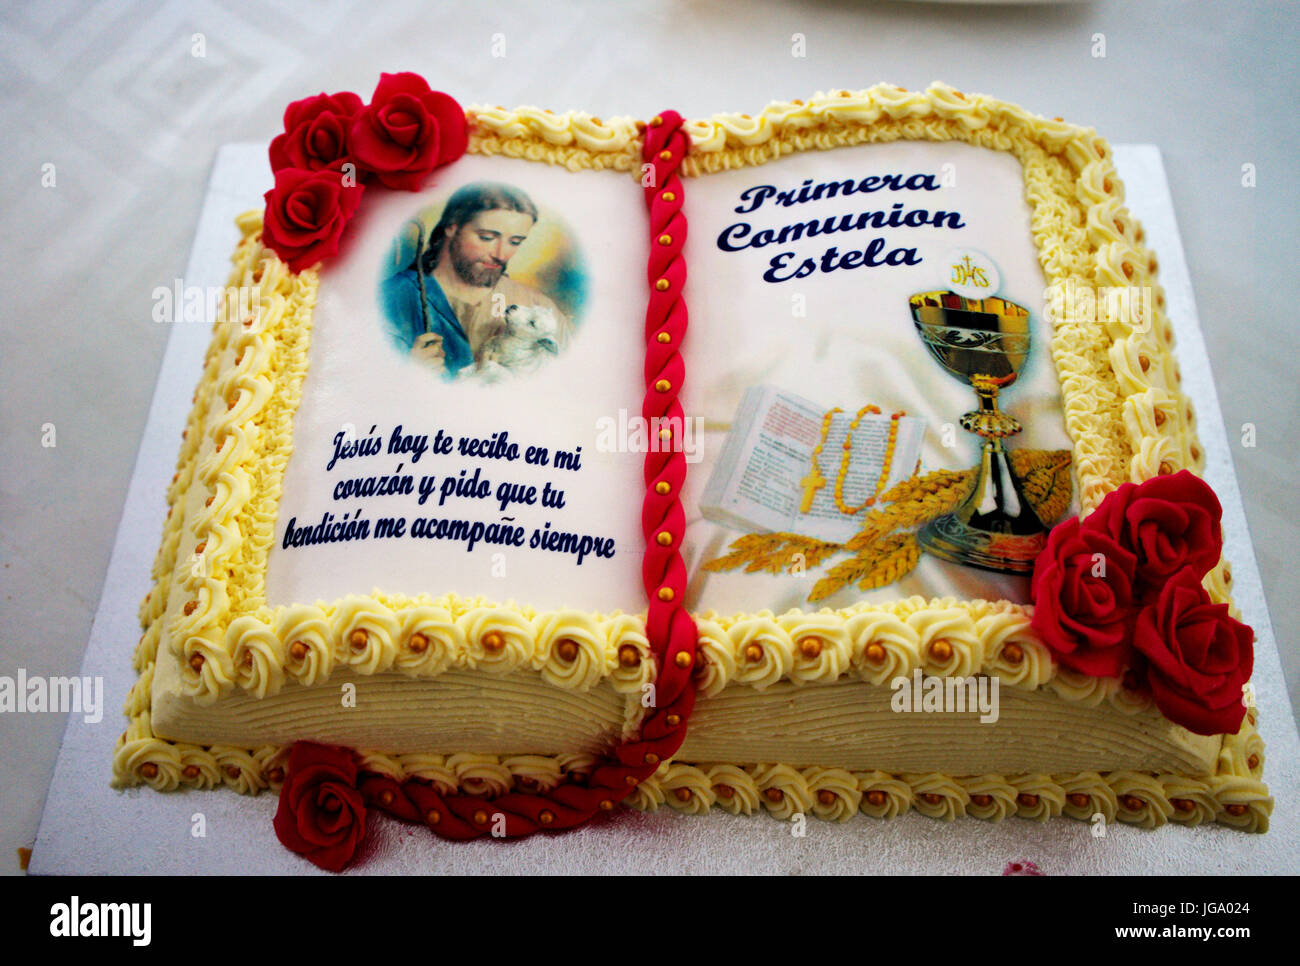 Hand crafted cake for a First Holy Communion celebration with red fondant roses and Spanish language writing Stock Photo